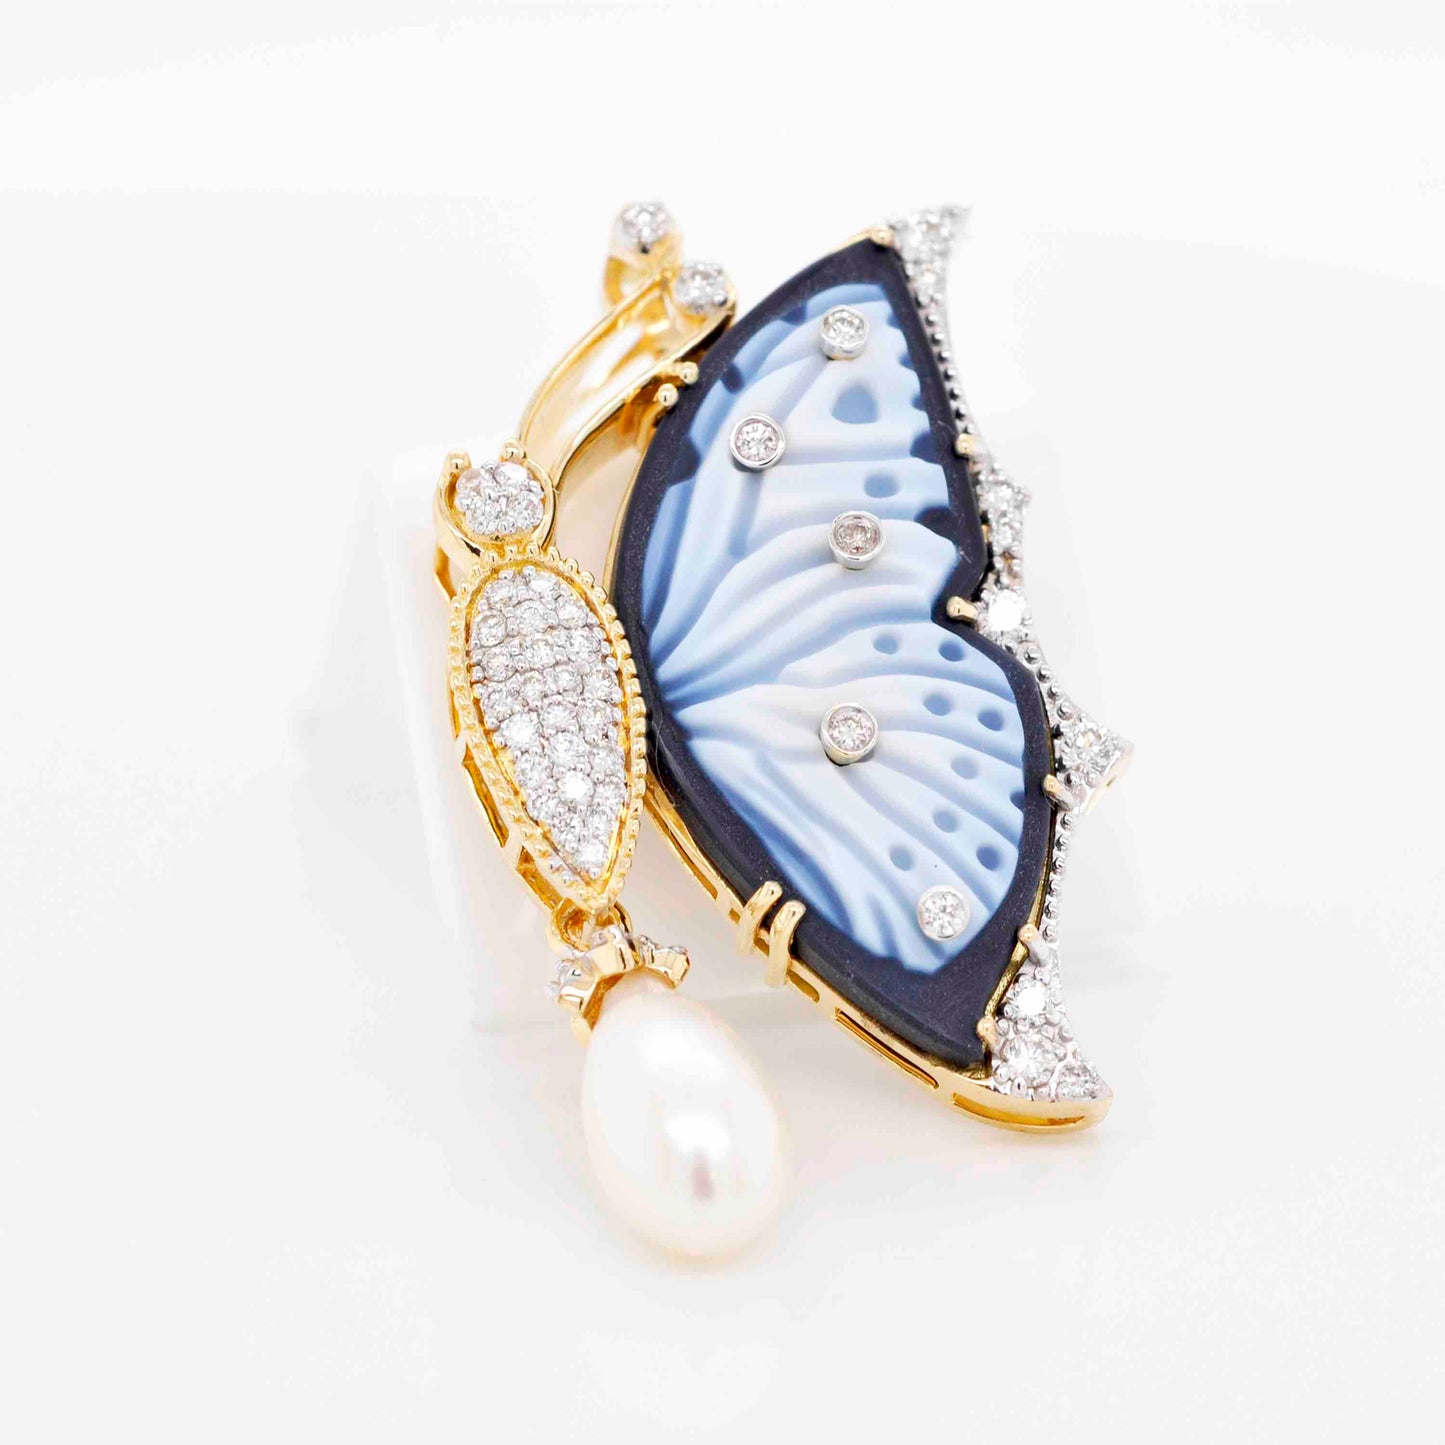 Butterfly and pearl combination in a unique pendant